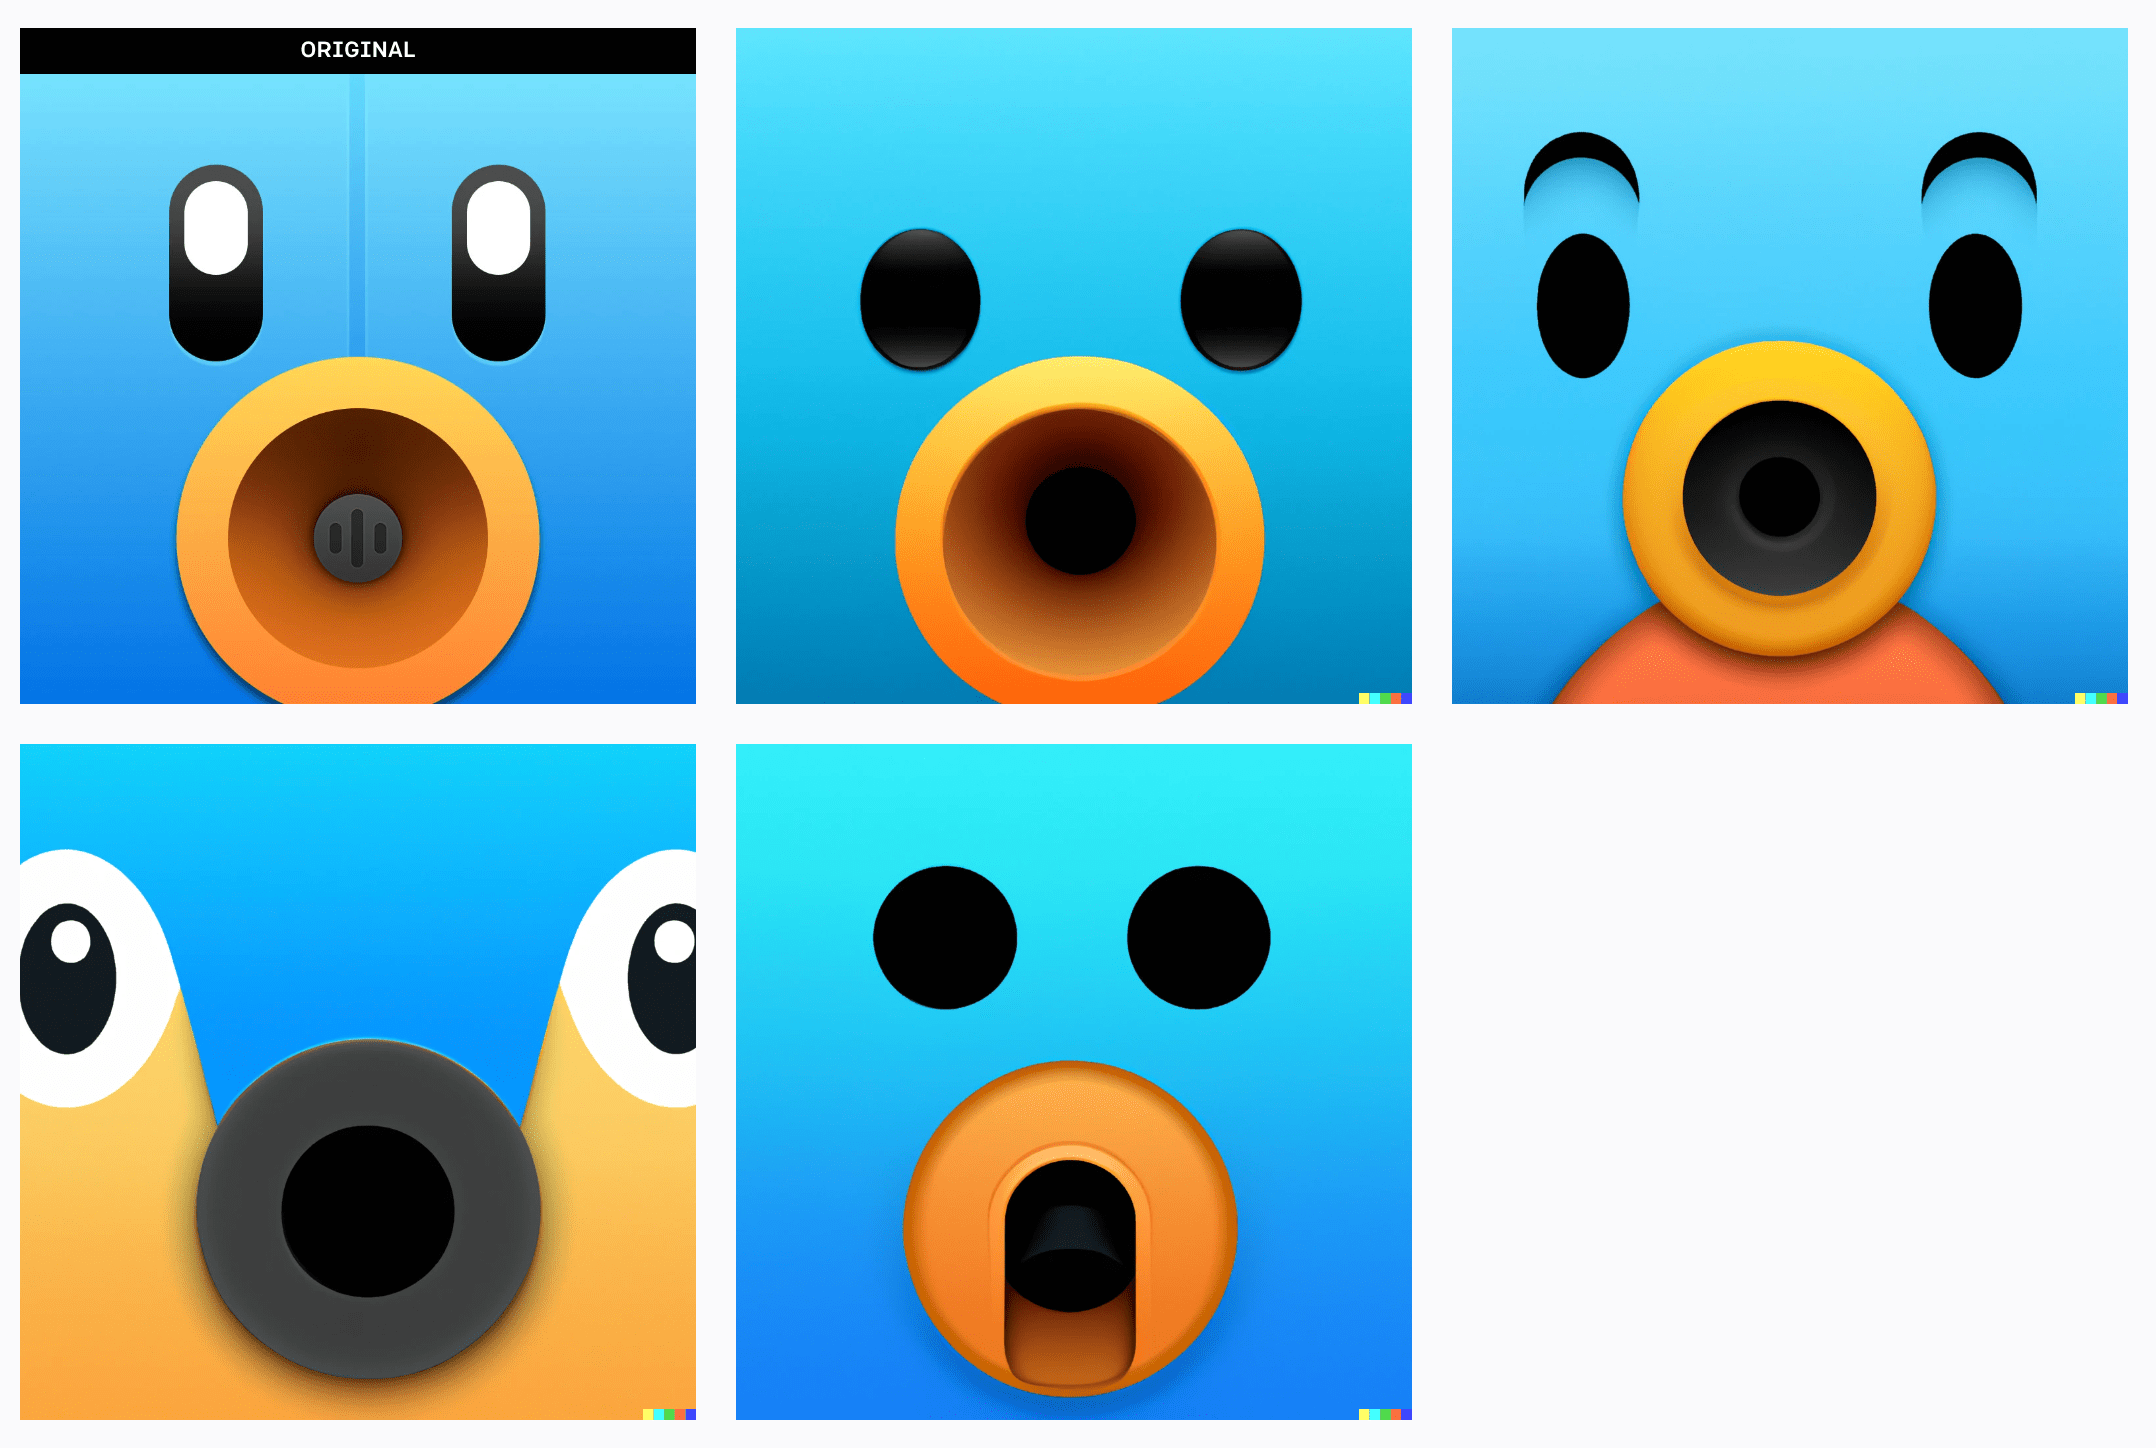 The original “Tweetbot 4” app icon with 4 AI-generated variations alongside it.